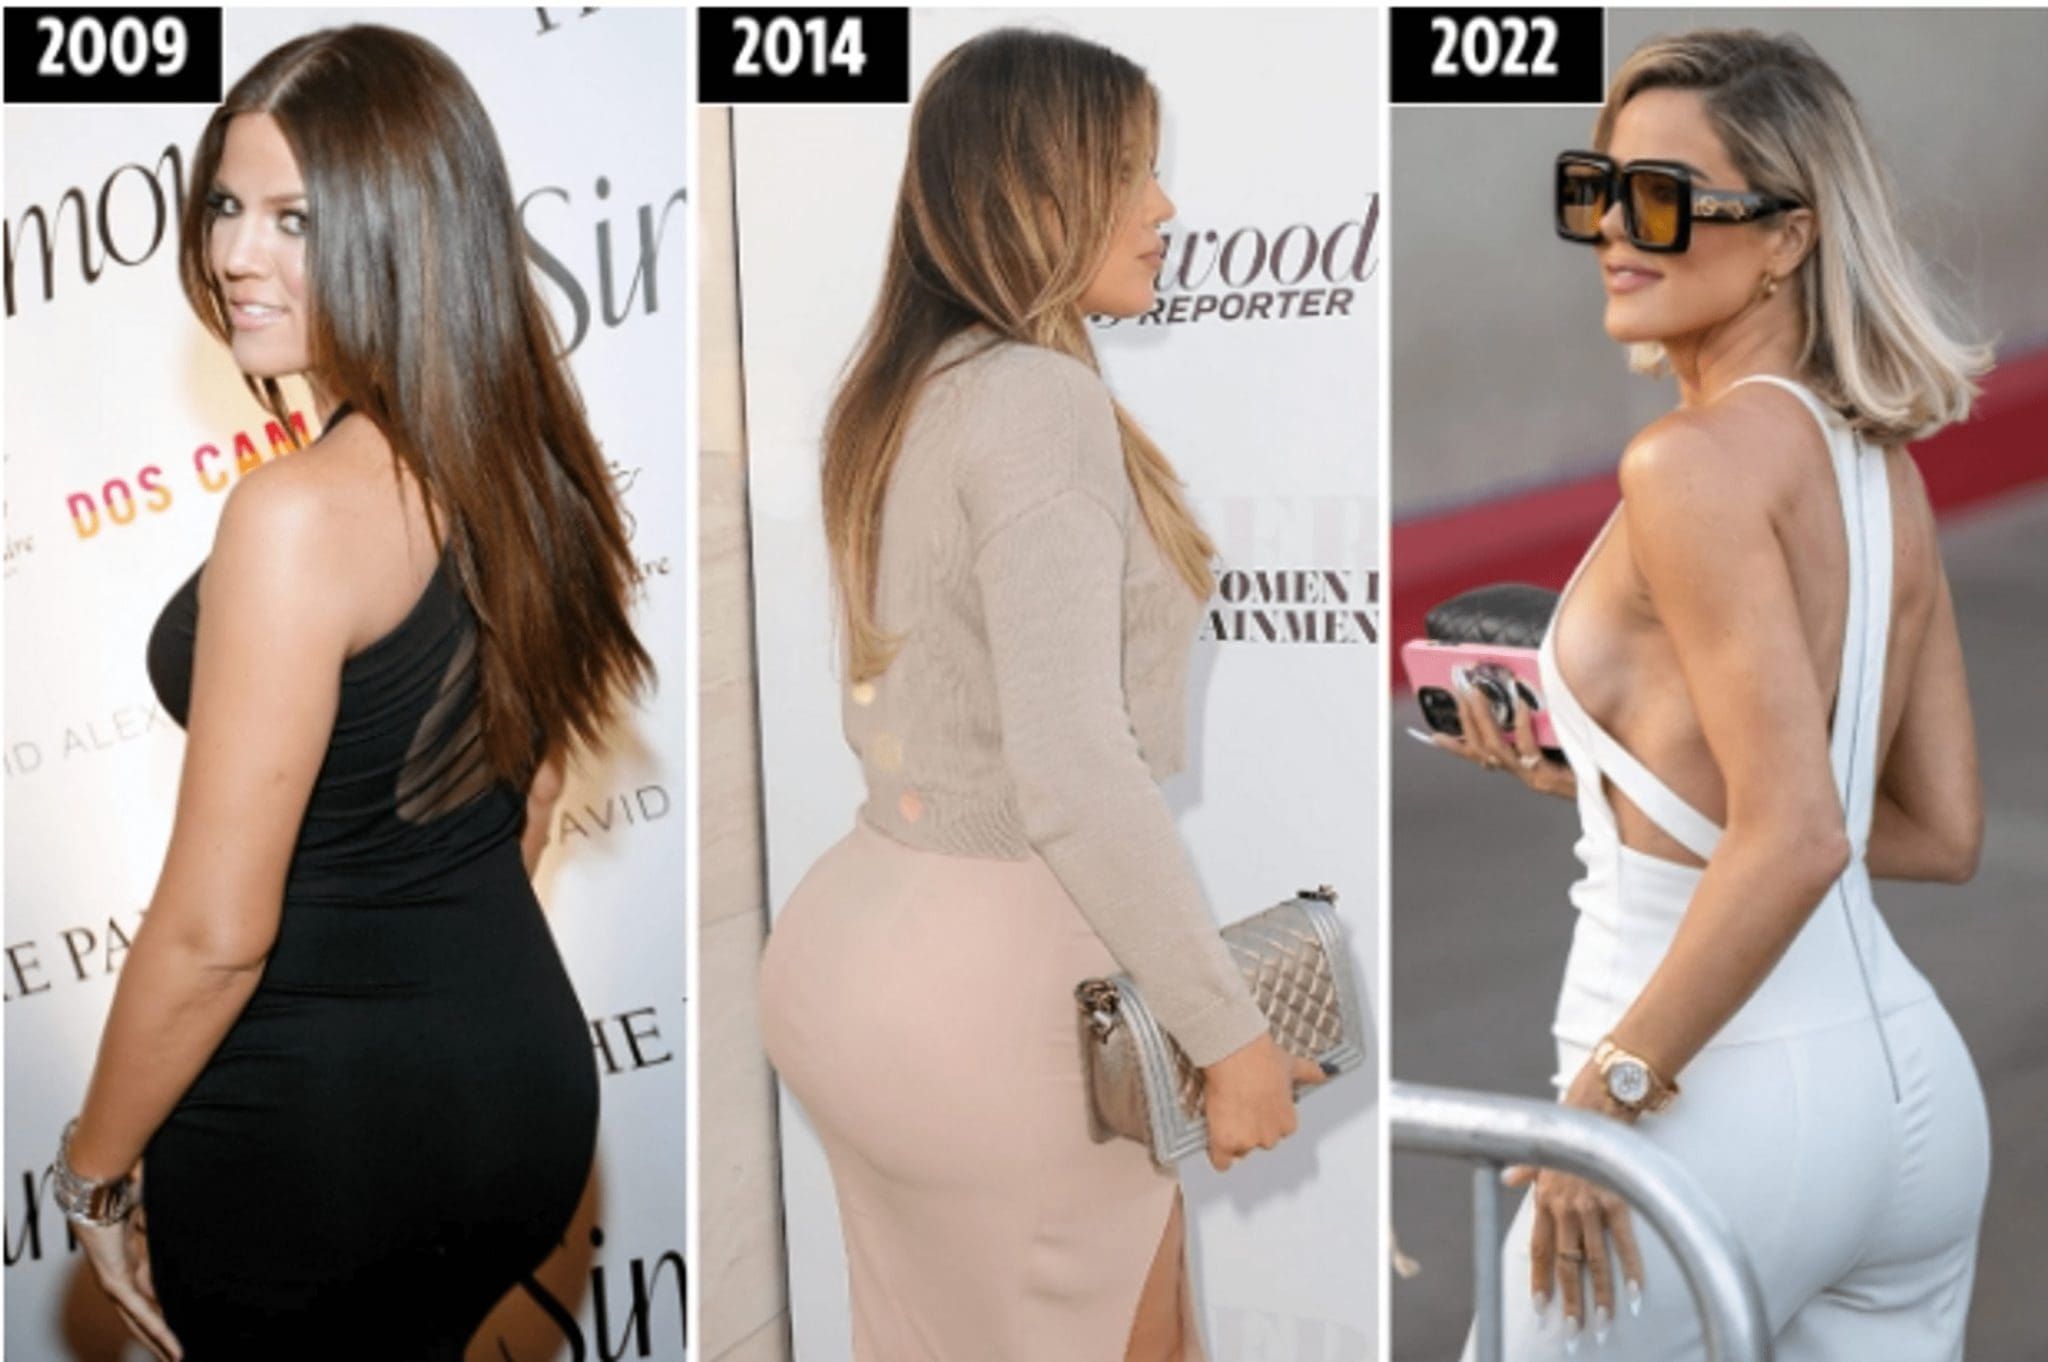 Fans of Khloe Kardashian suspect that she got rid of implants in the buttocks